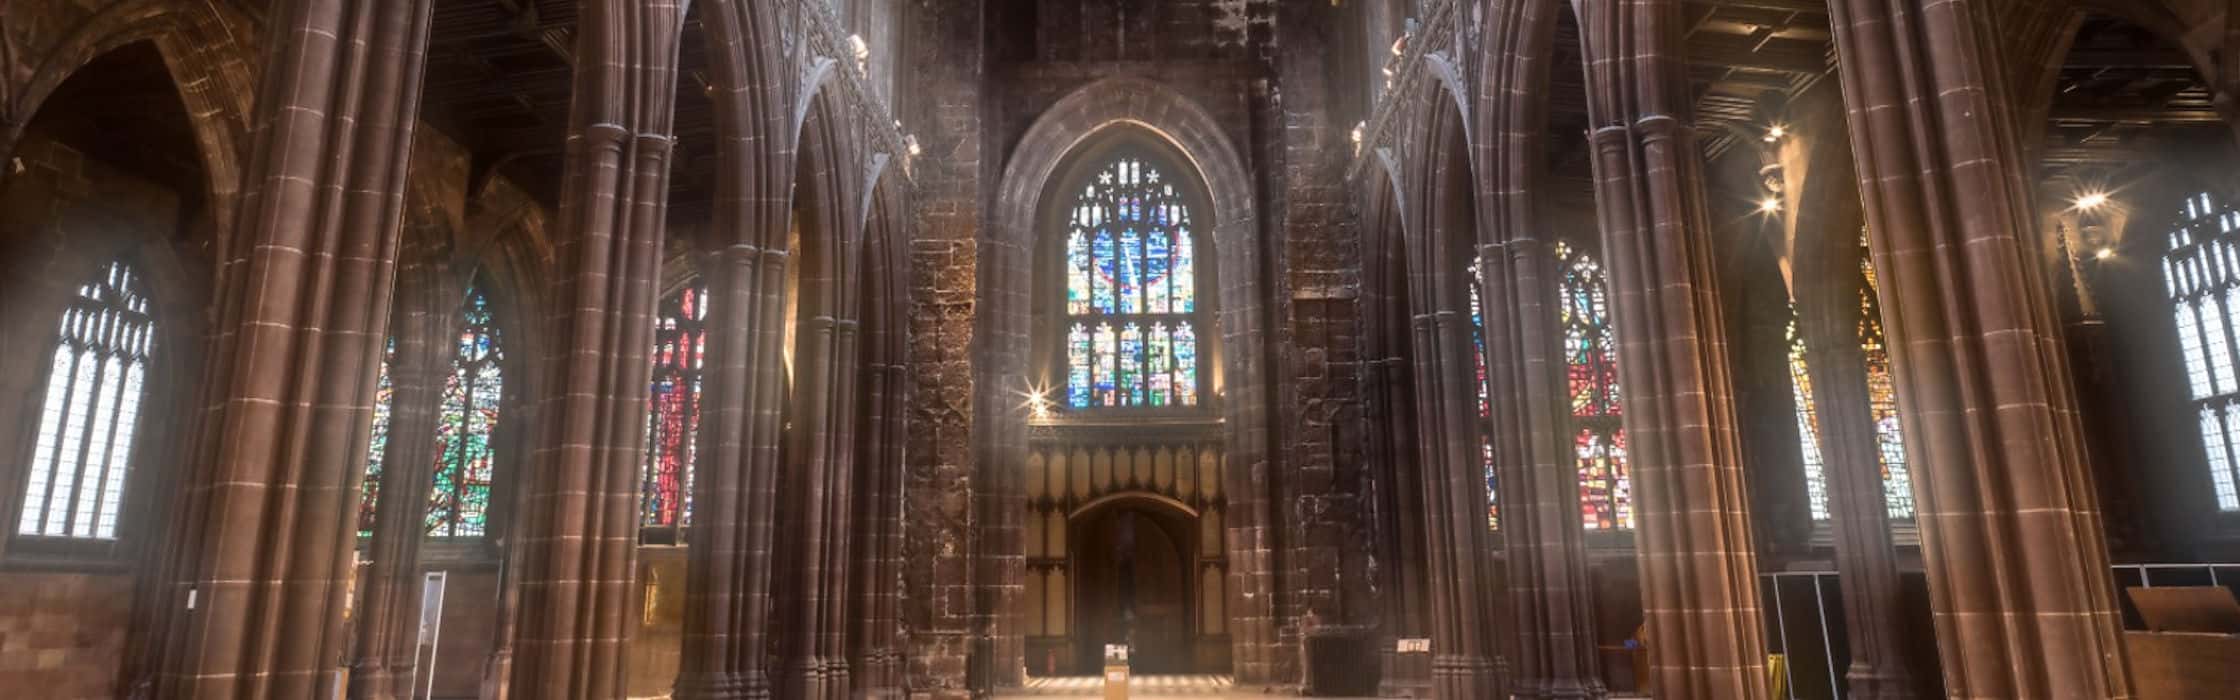 What's On at Manchester Cathedral, Manchester